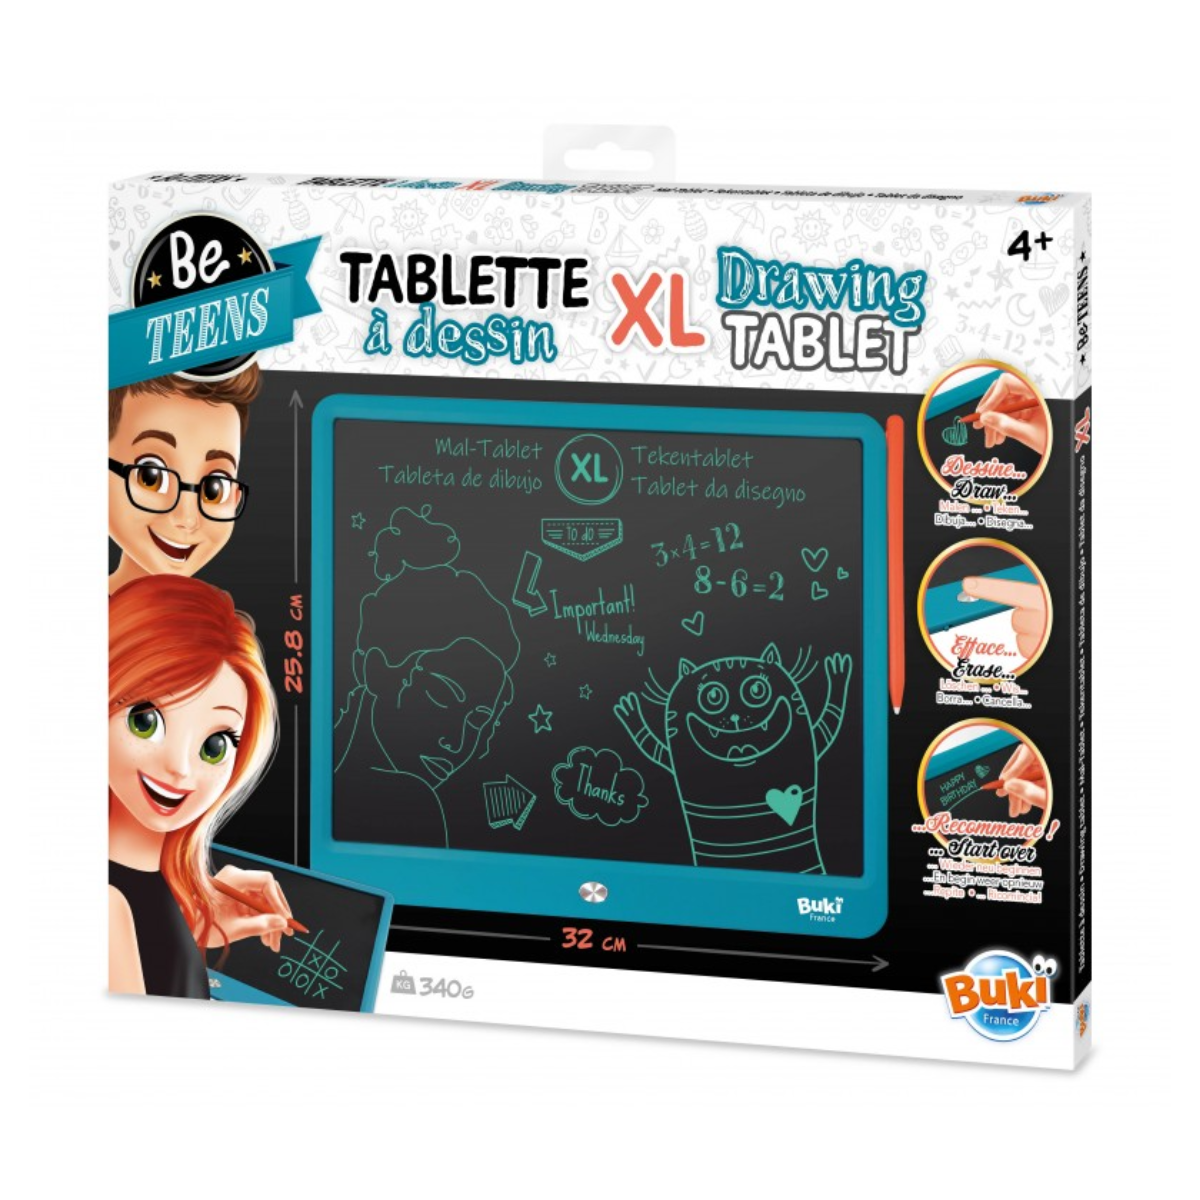 Drawing Tablet XL